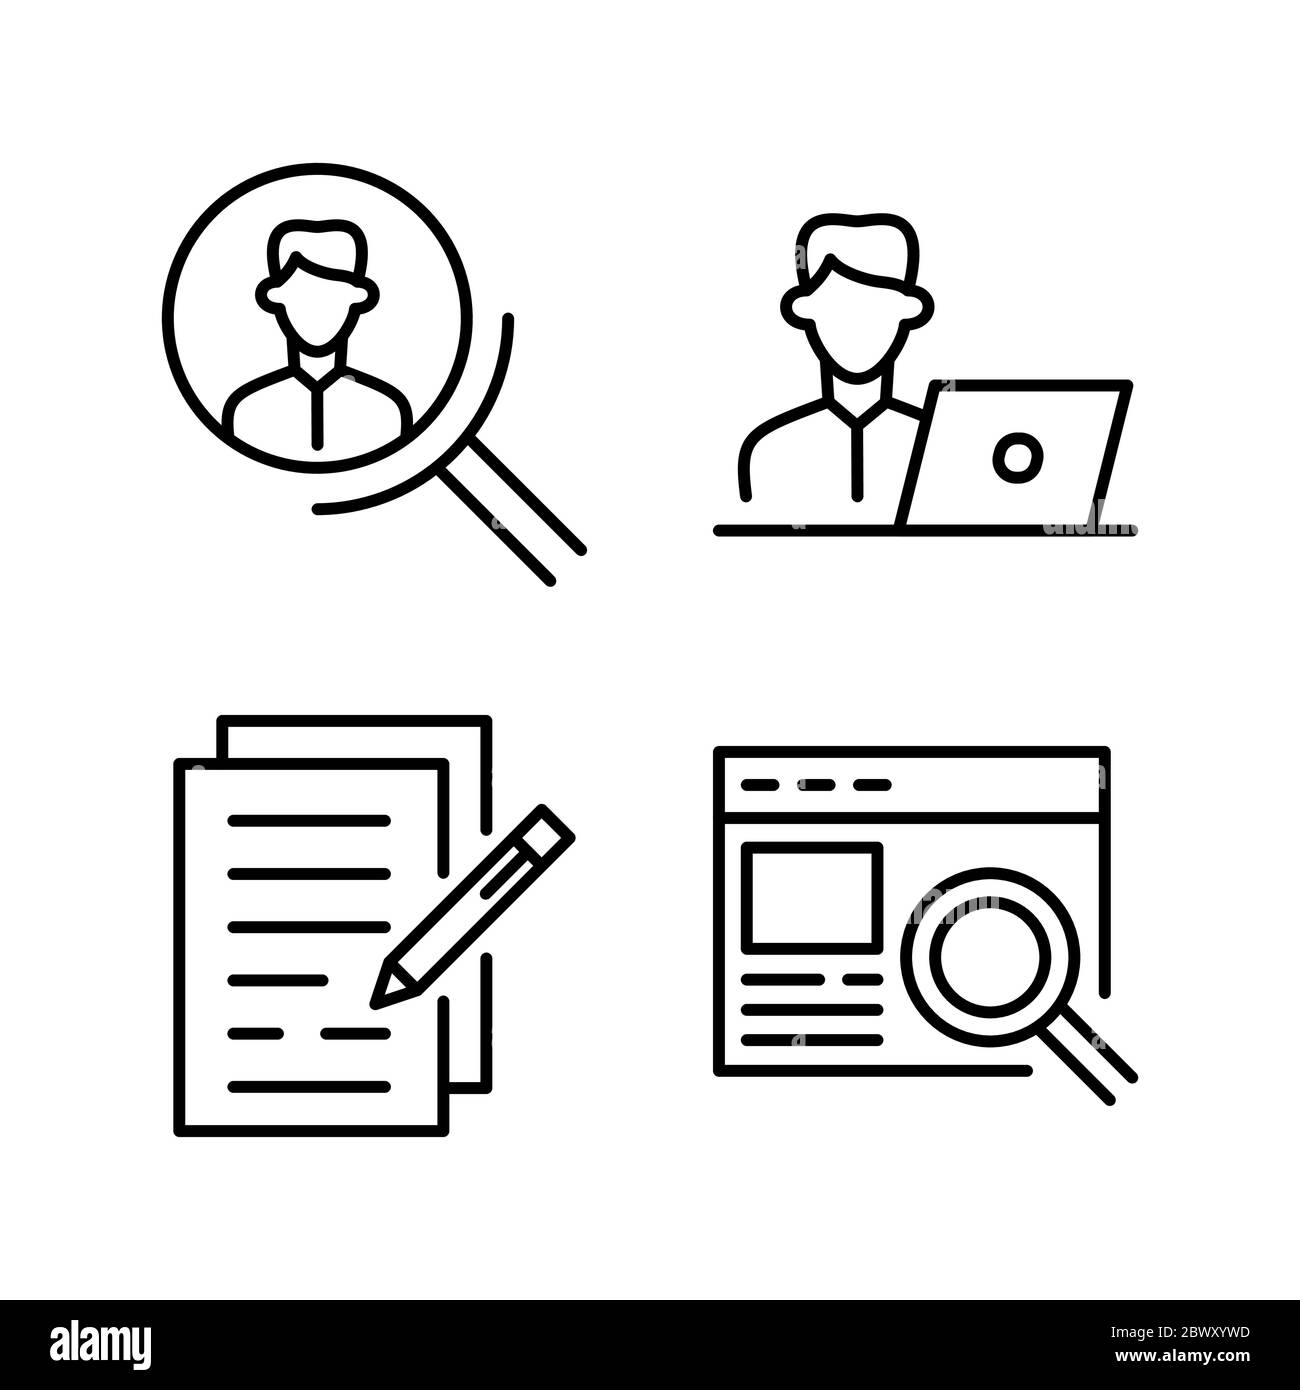 Human resources icon set Stock Vector